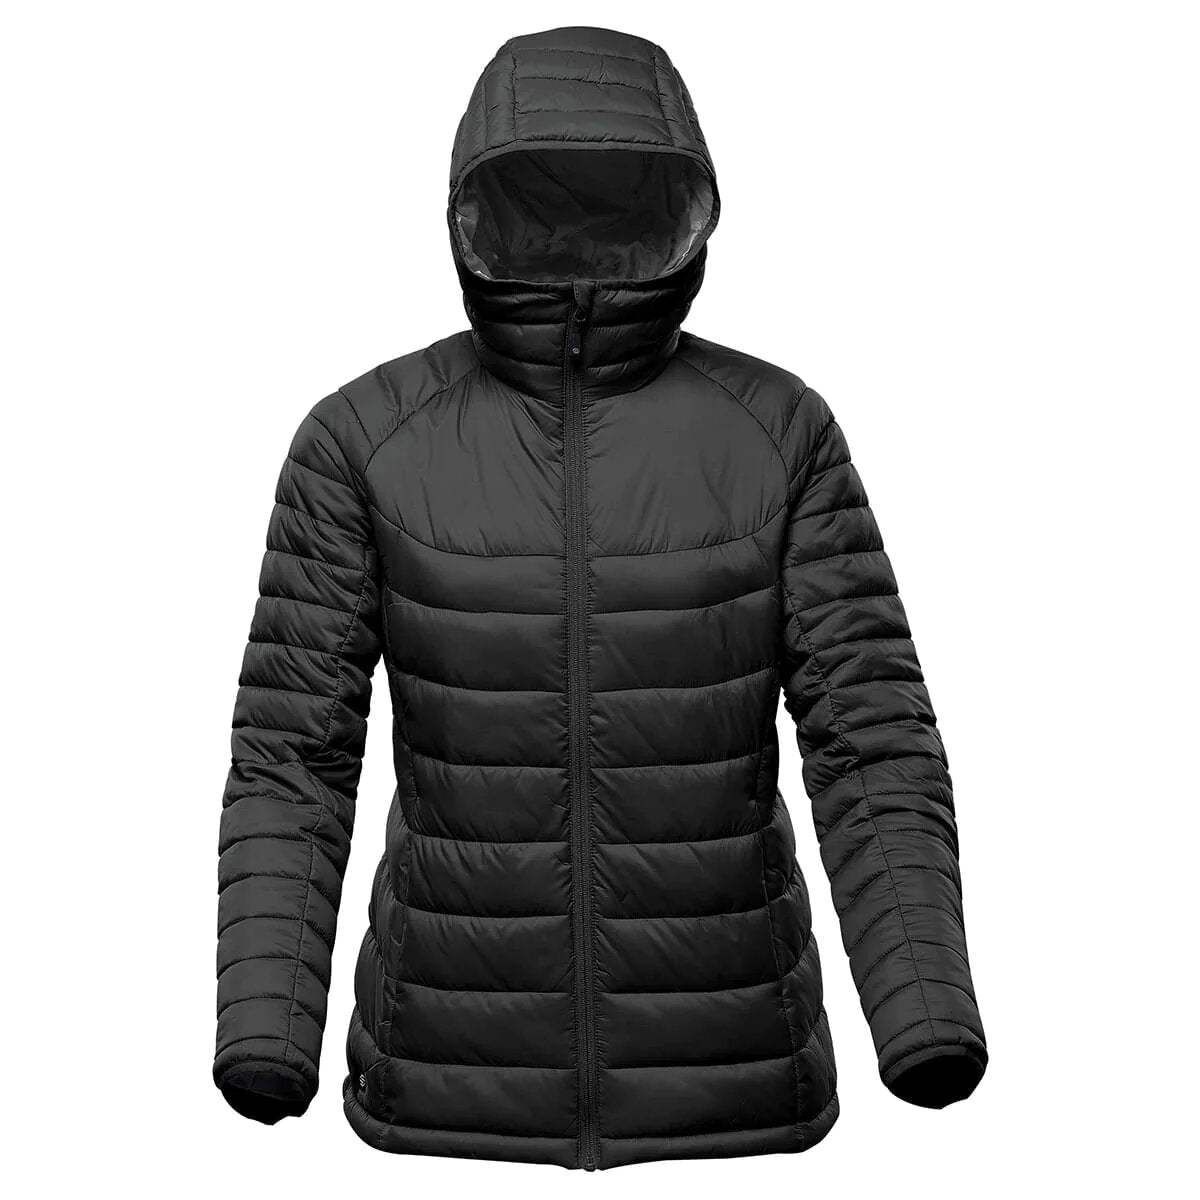 Women’s Stavanger Thermal Jacket by Stormtech - Promotions Only Group Limited